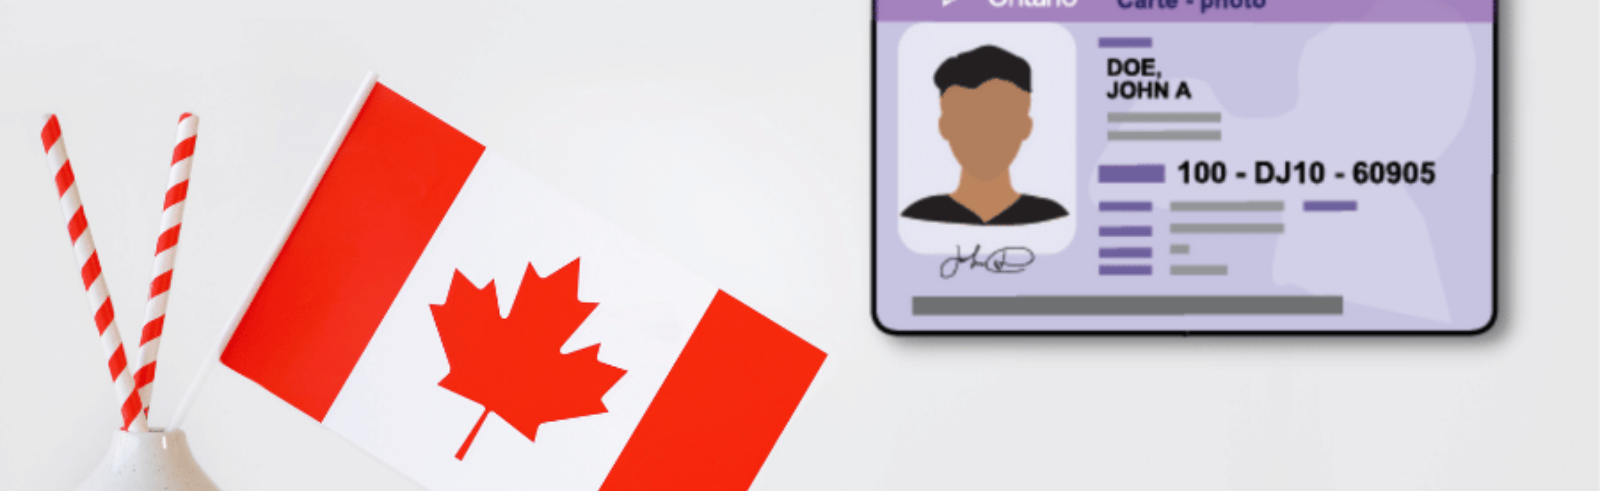 Service Ontario Resource Links for Photo ID